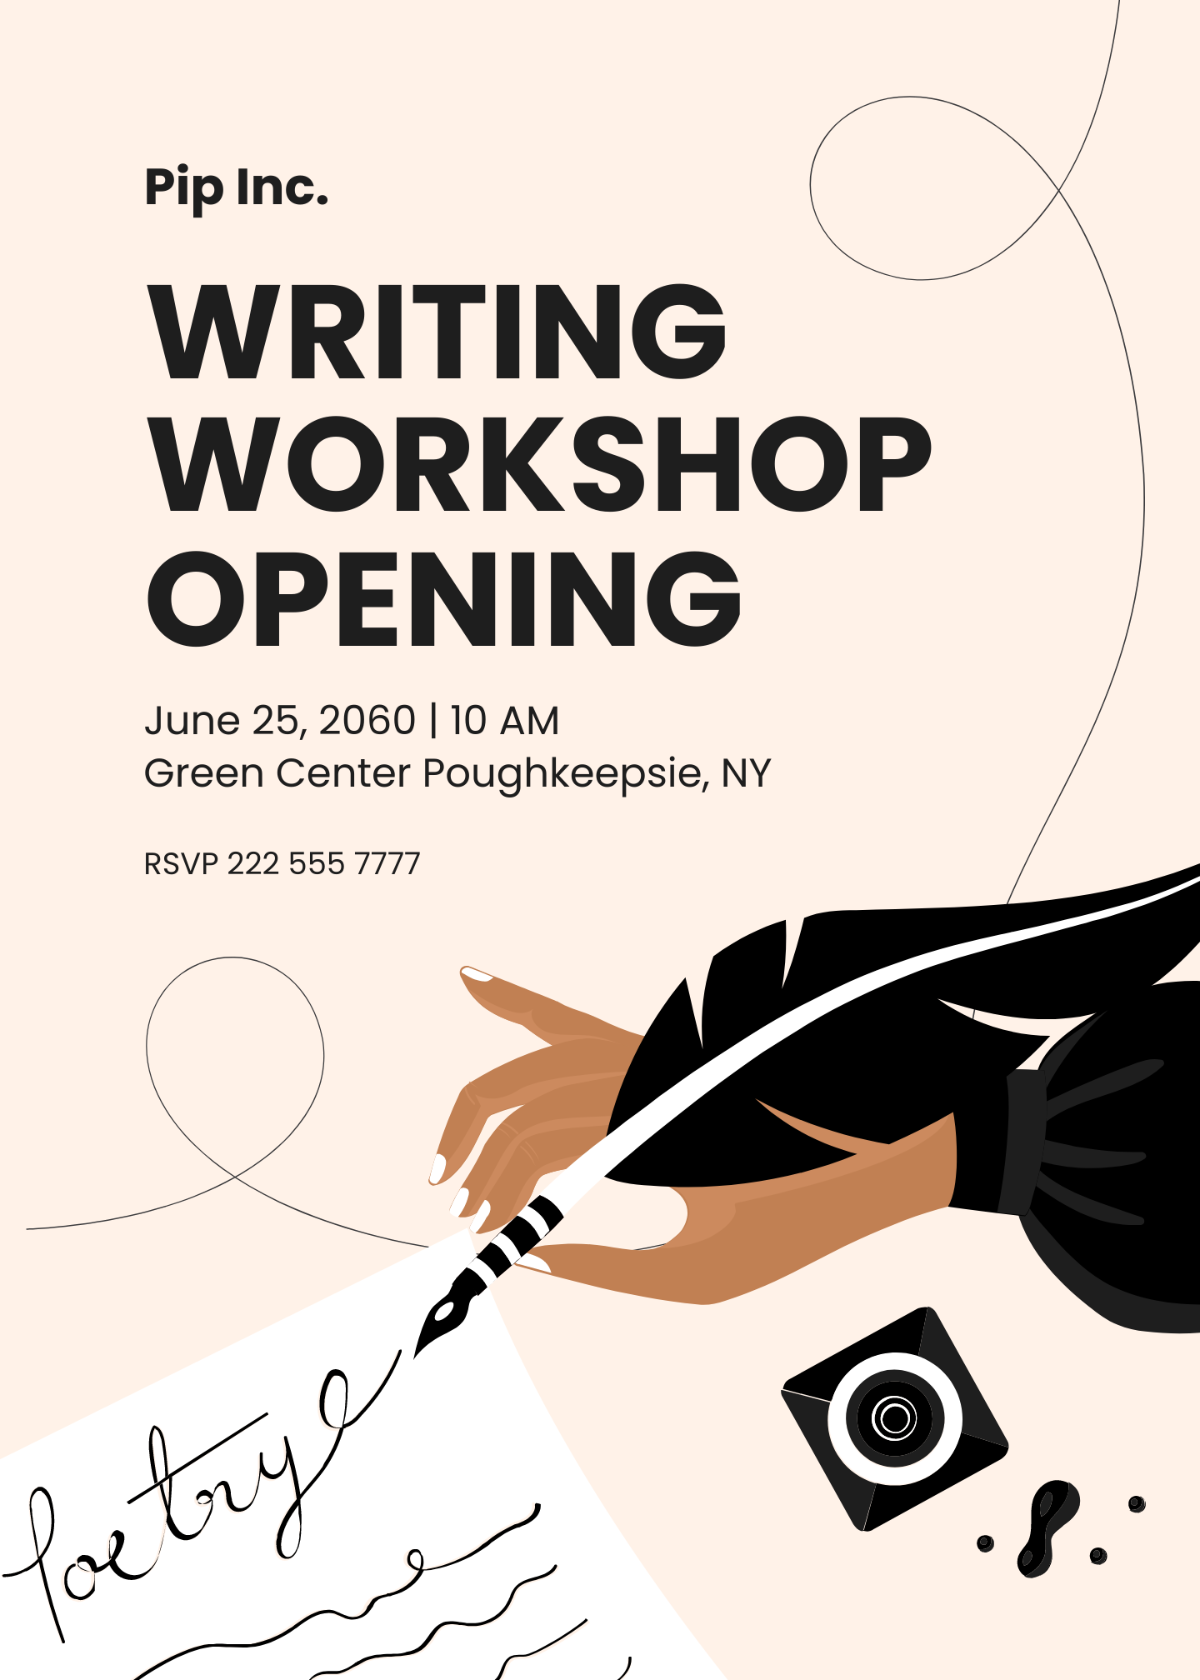 Free Workshop Opening Invitation Template